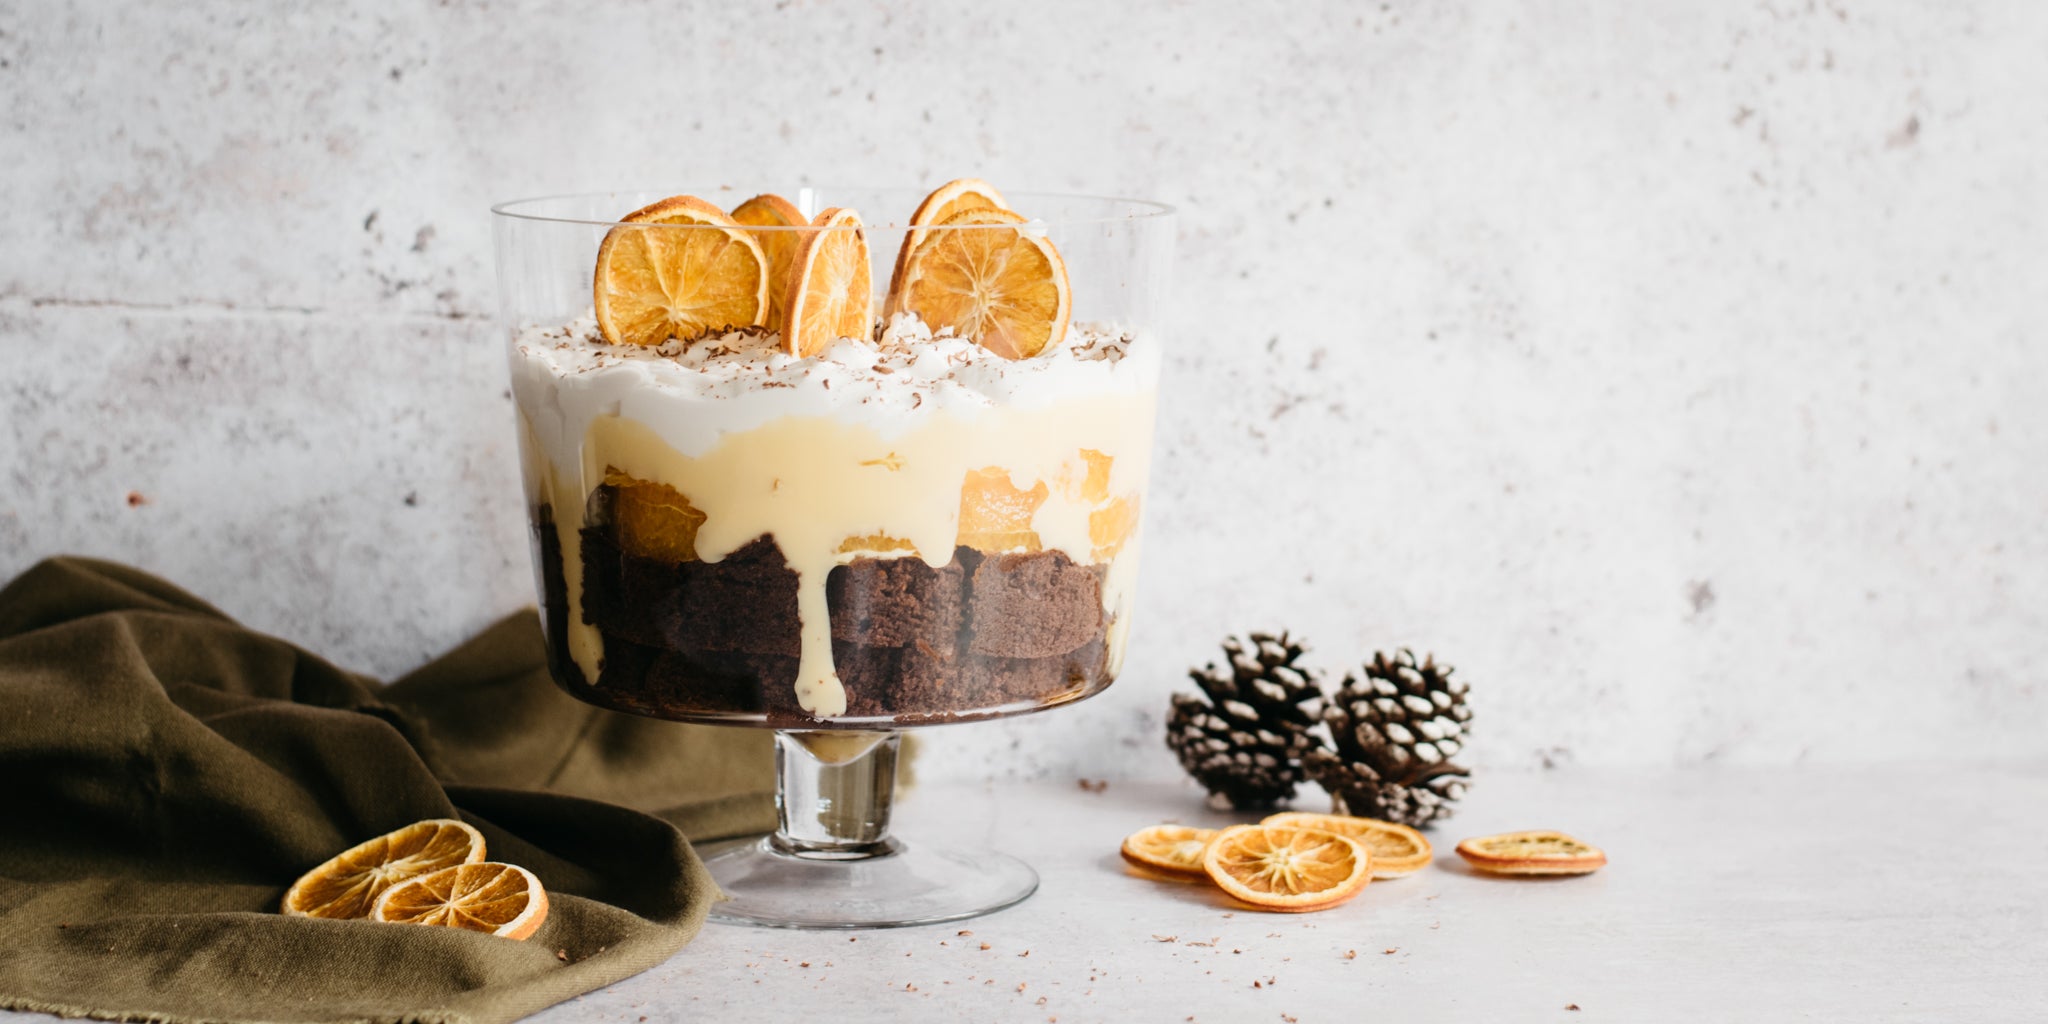 Close up of trifle dish serving Chocolate Orange Trifle with Baileys custard dripping down the sides. Next to slices of fresh orange and pine cones